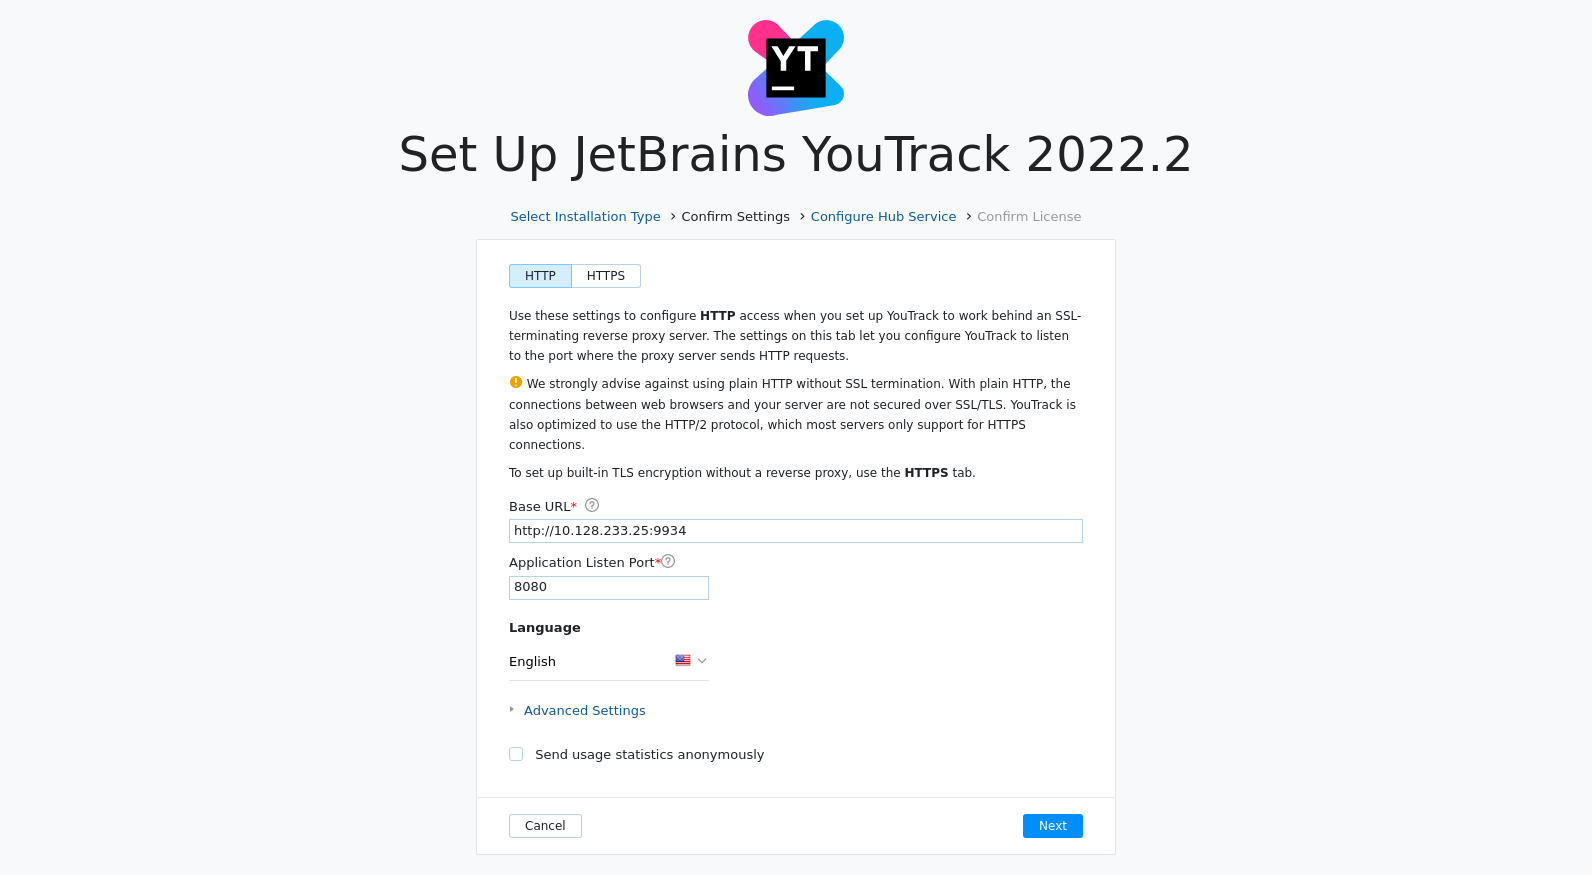 Install YouTrack confirm settings